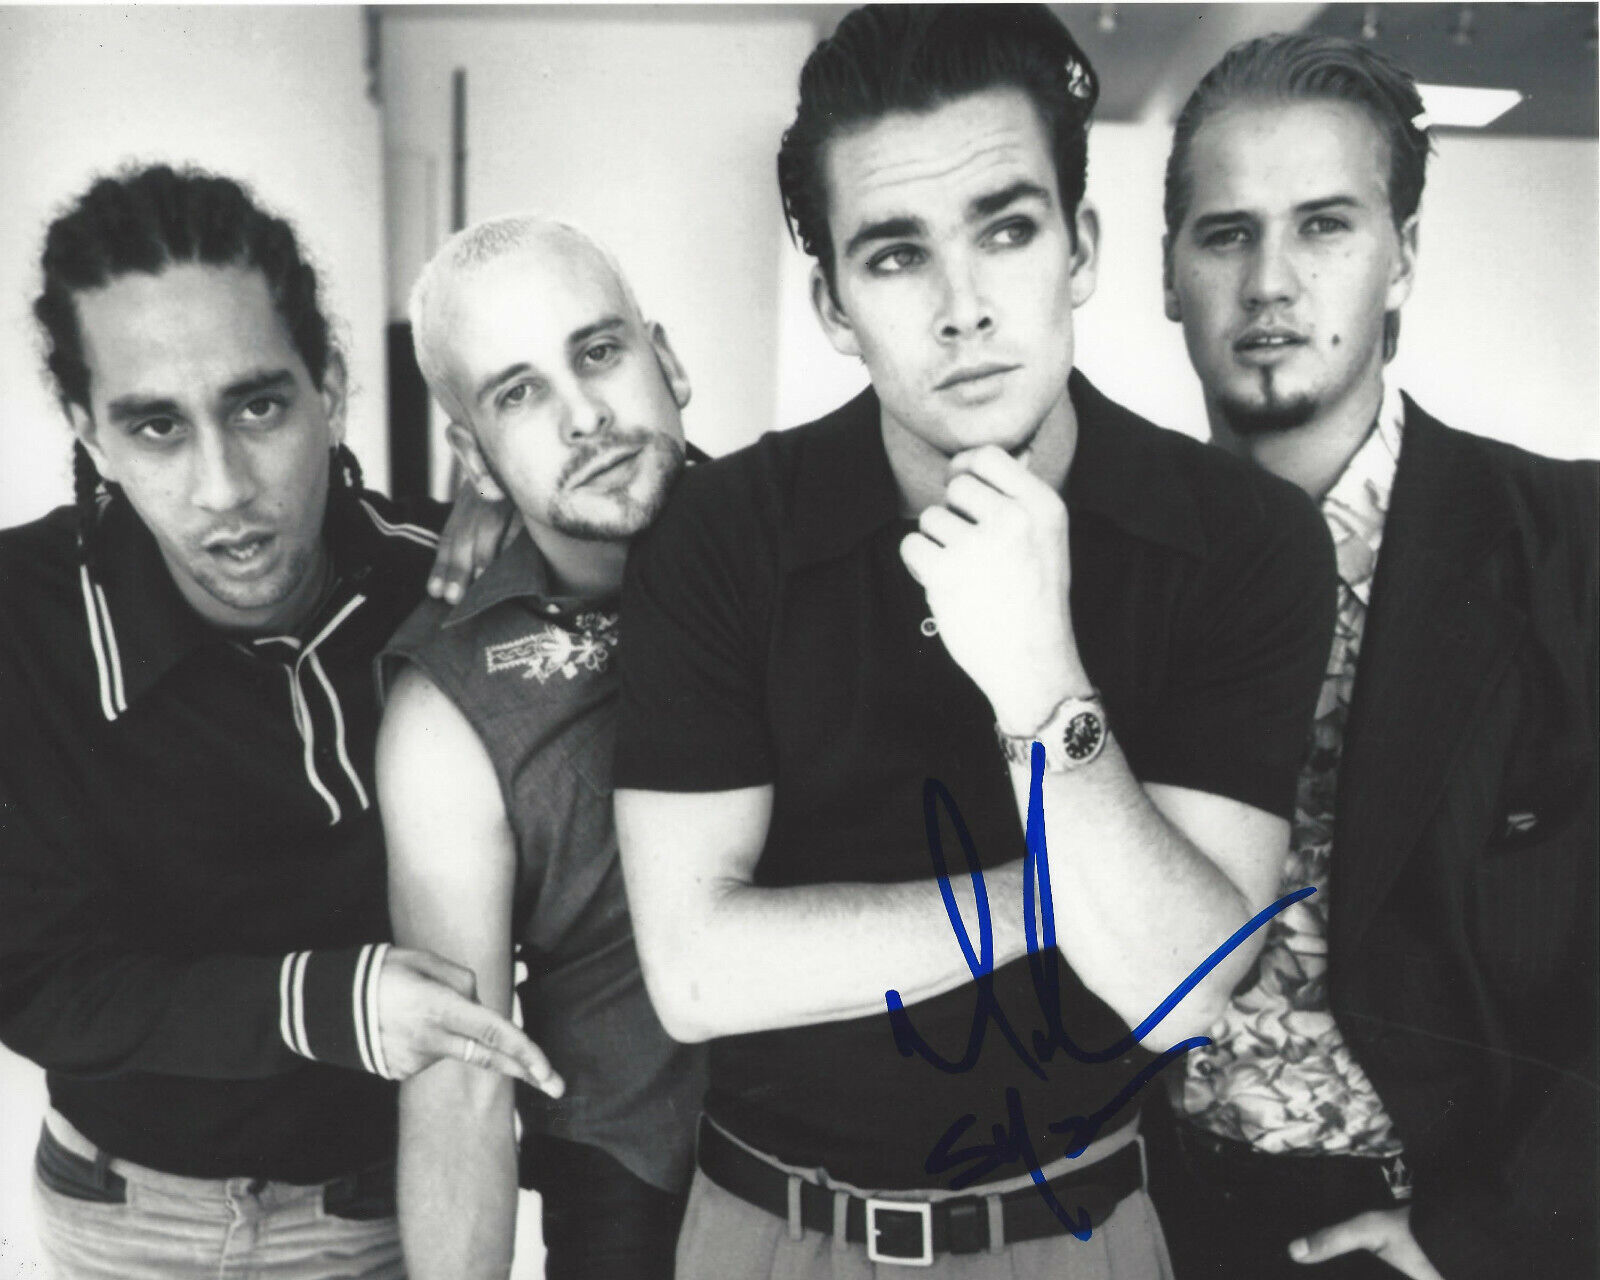 MARK MCGRATH SUGAR RAY LEAD SINGER HAND SIGNED AUTHENTIC 8X10 Photo Poster painting G COA PROOF